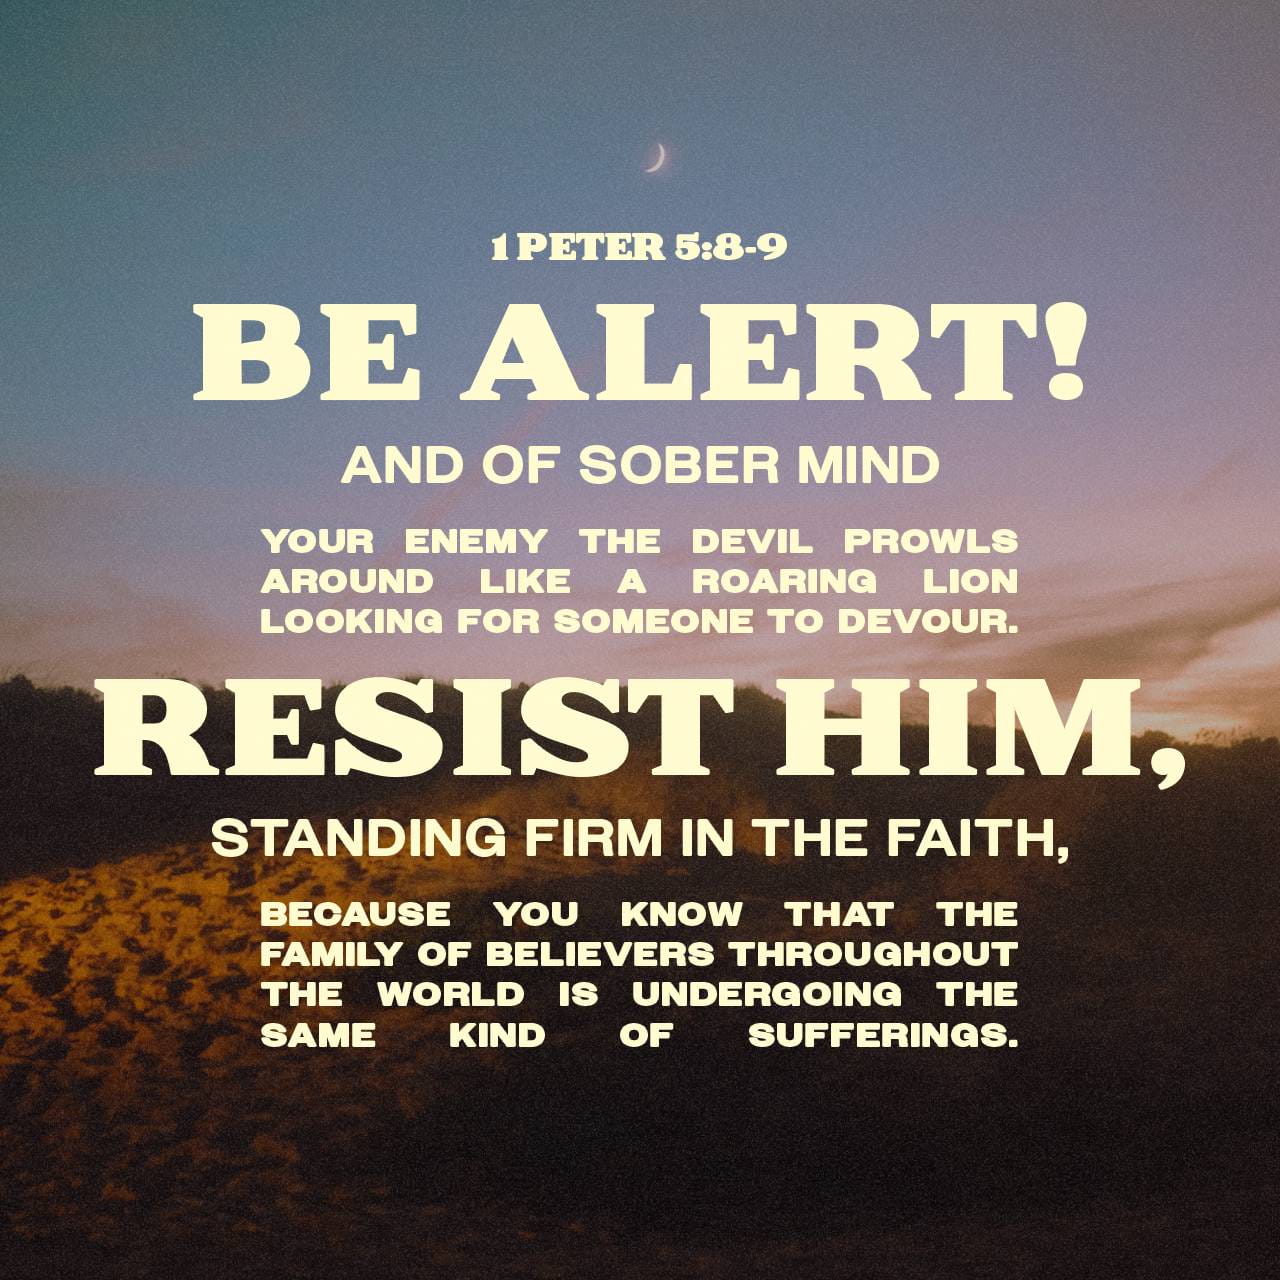 1 Peter 5:8-9 Be sober, be vigilant; because your adversary the devil, as a roaring lion, walketh about, seeking whom he may devour: whom resist stedfast in the faith, knowing that the same afflictions are accompli | King James Version (KJV) | Download Th